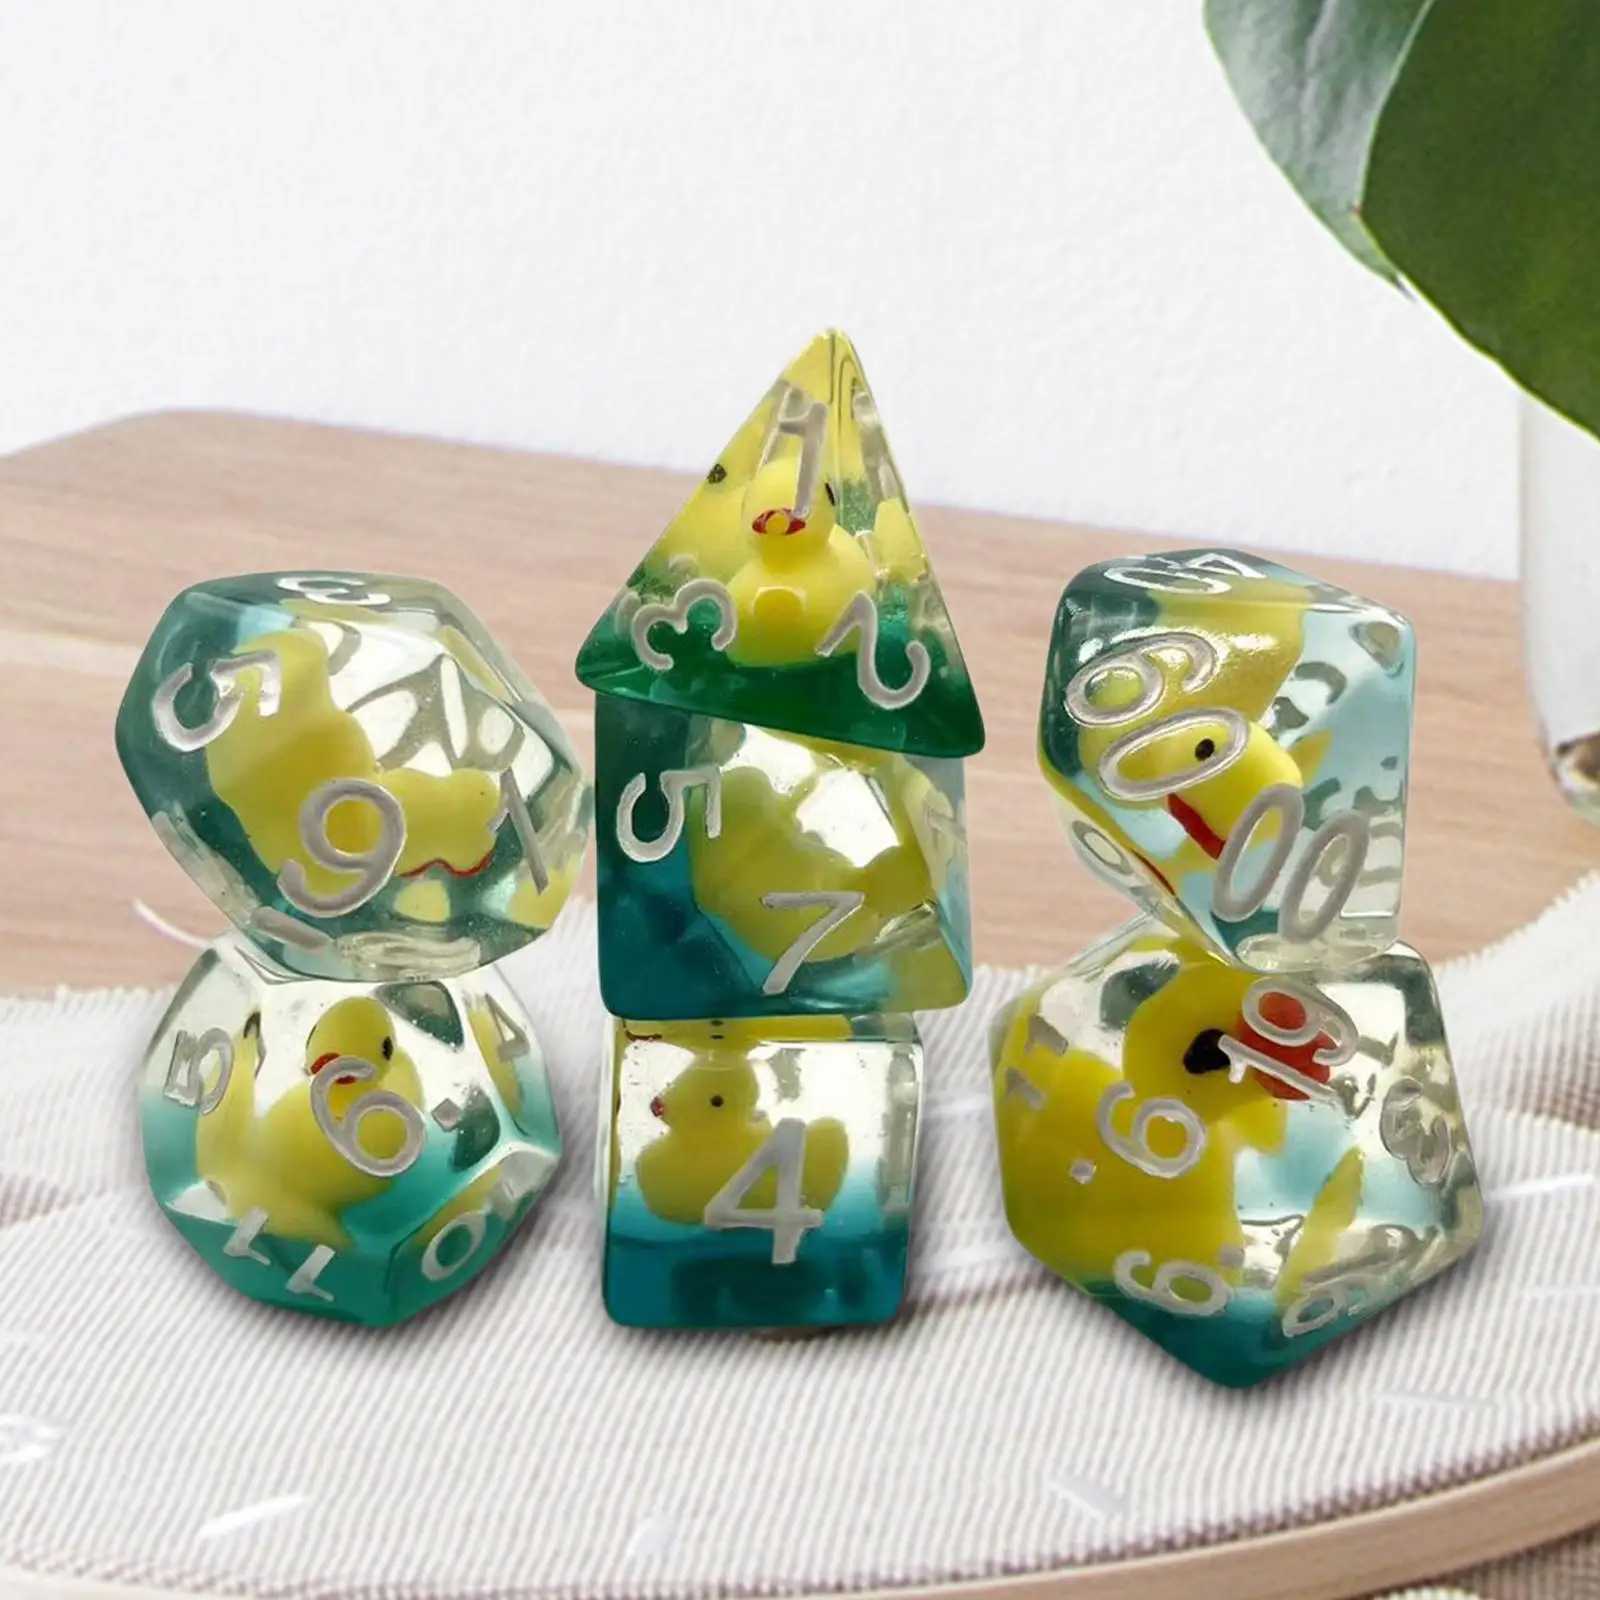 7 Pieces Polyhedral Dices Set Filled with Ducks Animal for MTG Board Game D8 d10 d12 d20 7 Die Polyhedral Dices Set